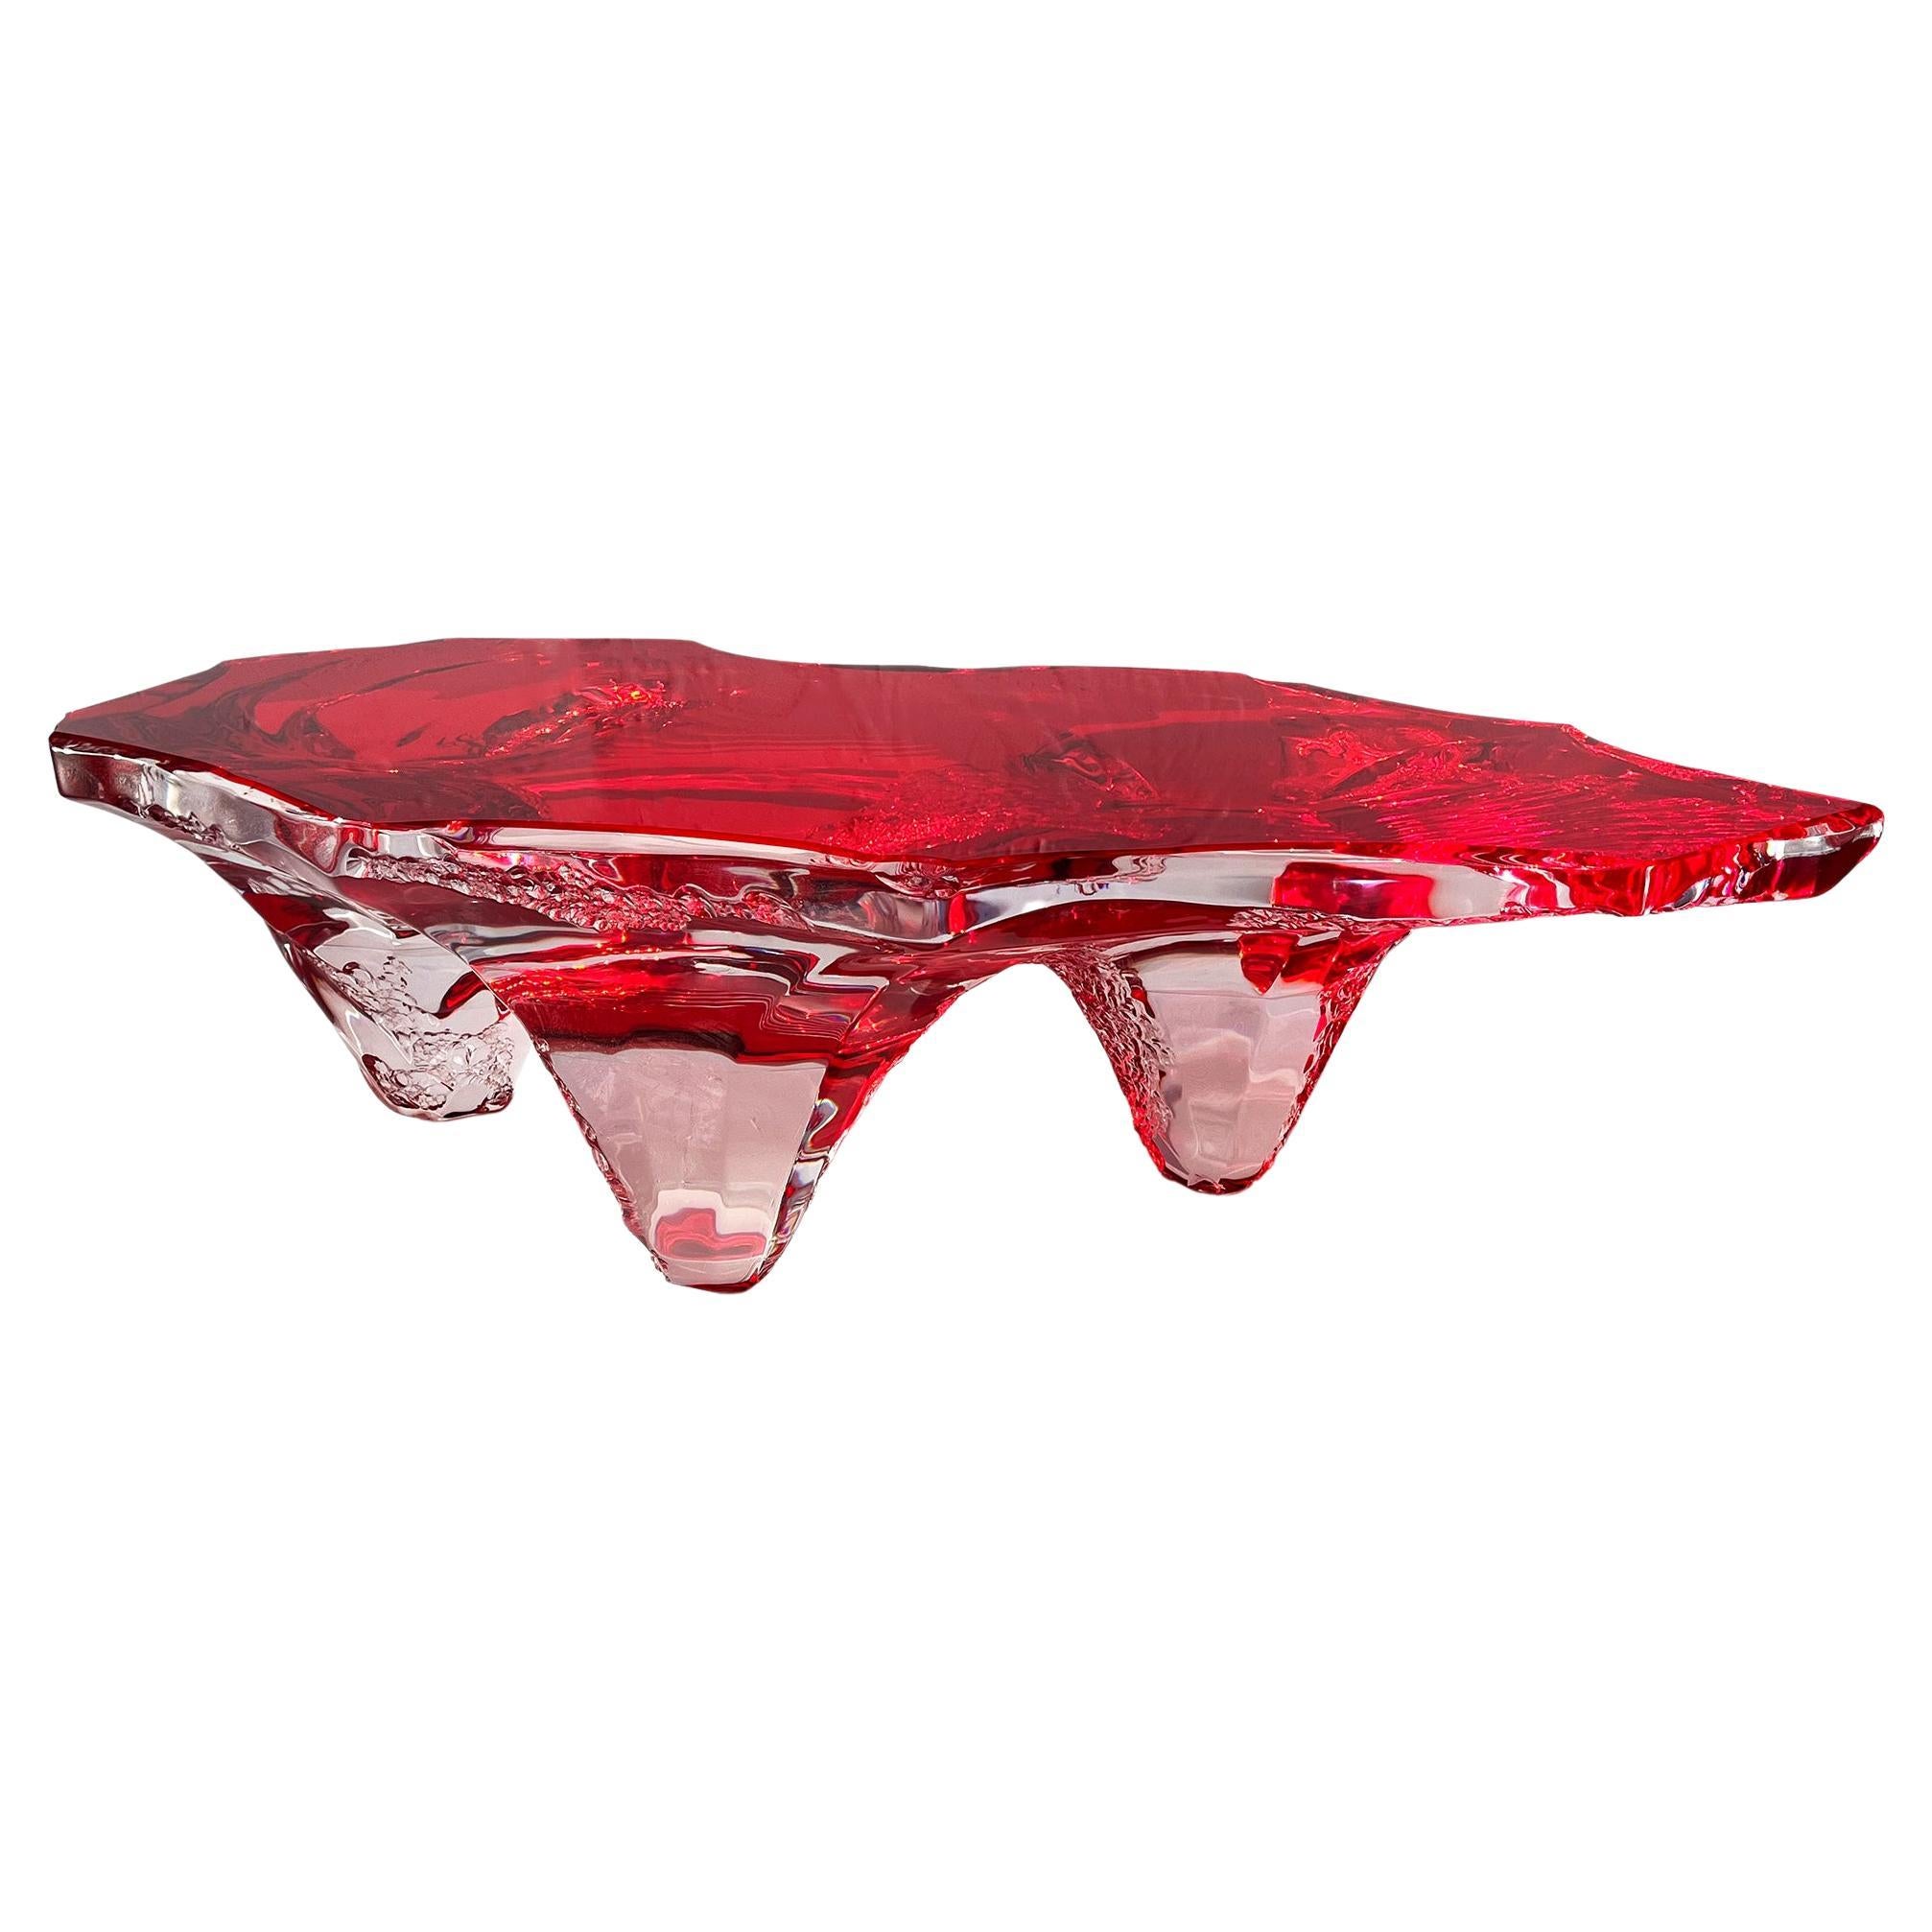 Coffee table Glacialis red version designed by Marco Pettinari for Superego Editions.
This sculpture/coffee table made from a transparent Plexiglas block, it made by hand and with numerical control machinery.
Limited edition of 9